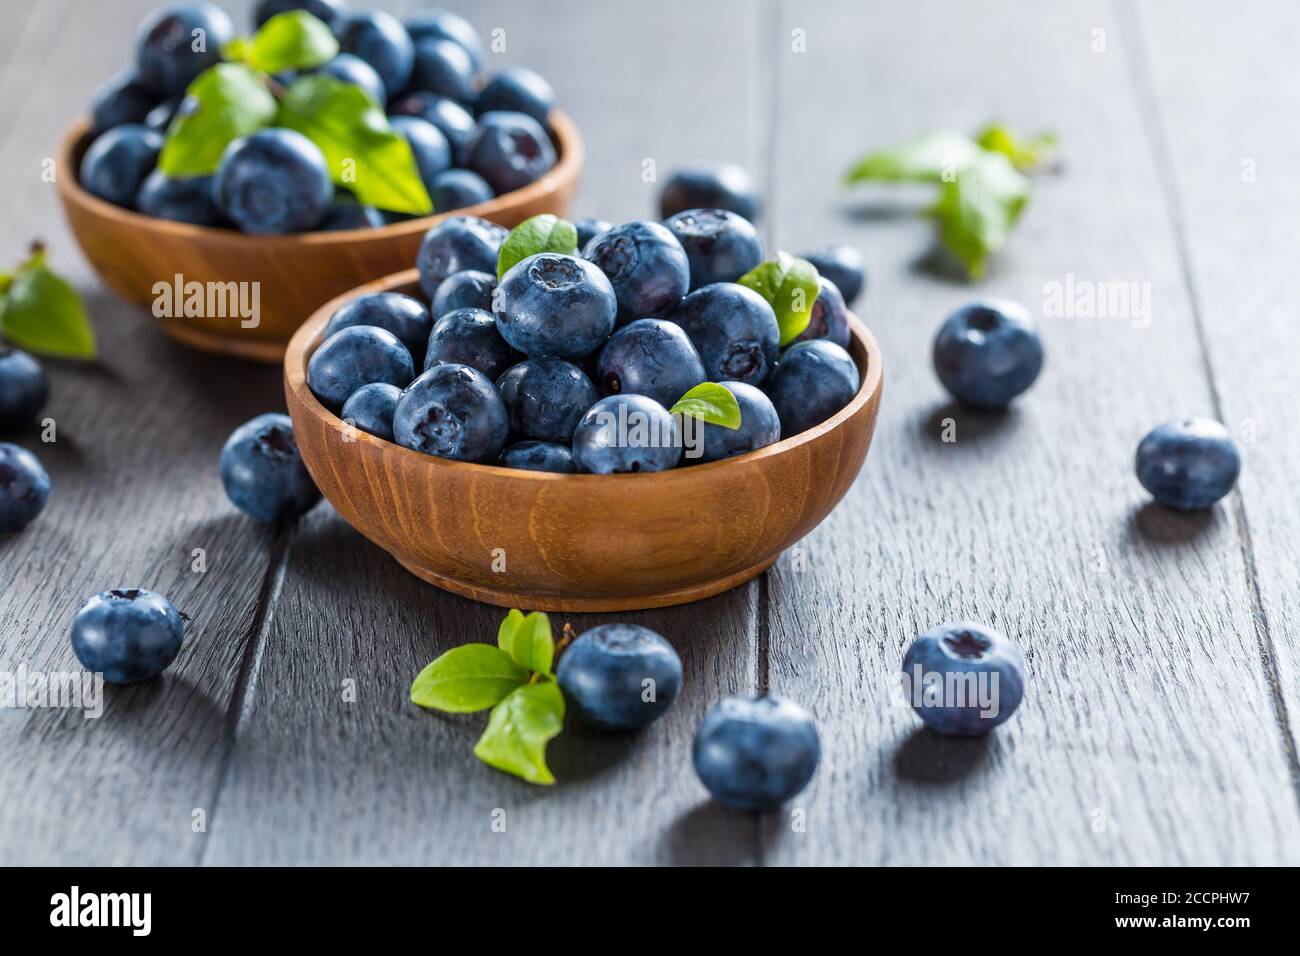 Fresh organic blueberry in bowl on wooden background. Healthy food concept, juicy wild forest berries. Stock Photo